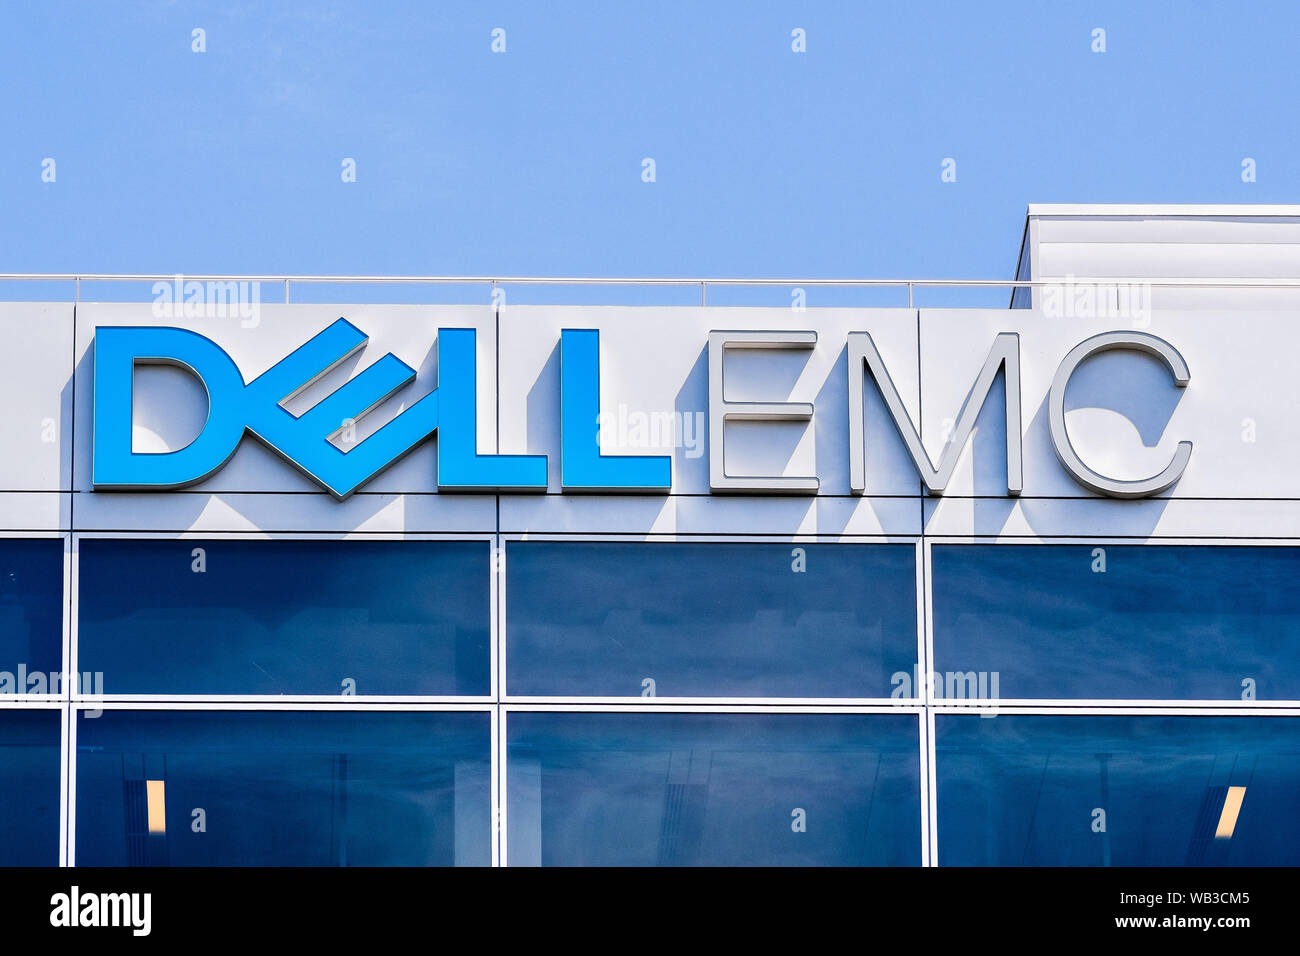 July 30, 2019 Santa Clara / CA / USA - Close up of DellEmc logo at their headquarters in Silicon Valley; DellEmc is an American multinational informat Stock Photo